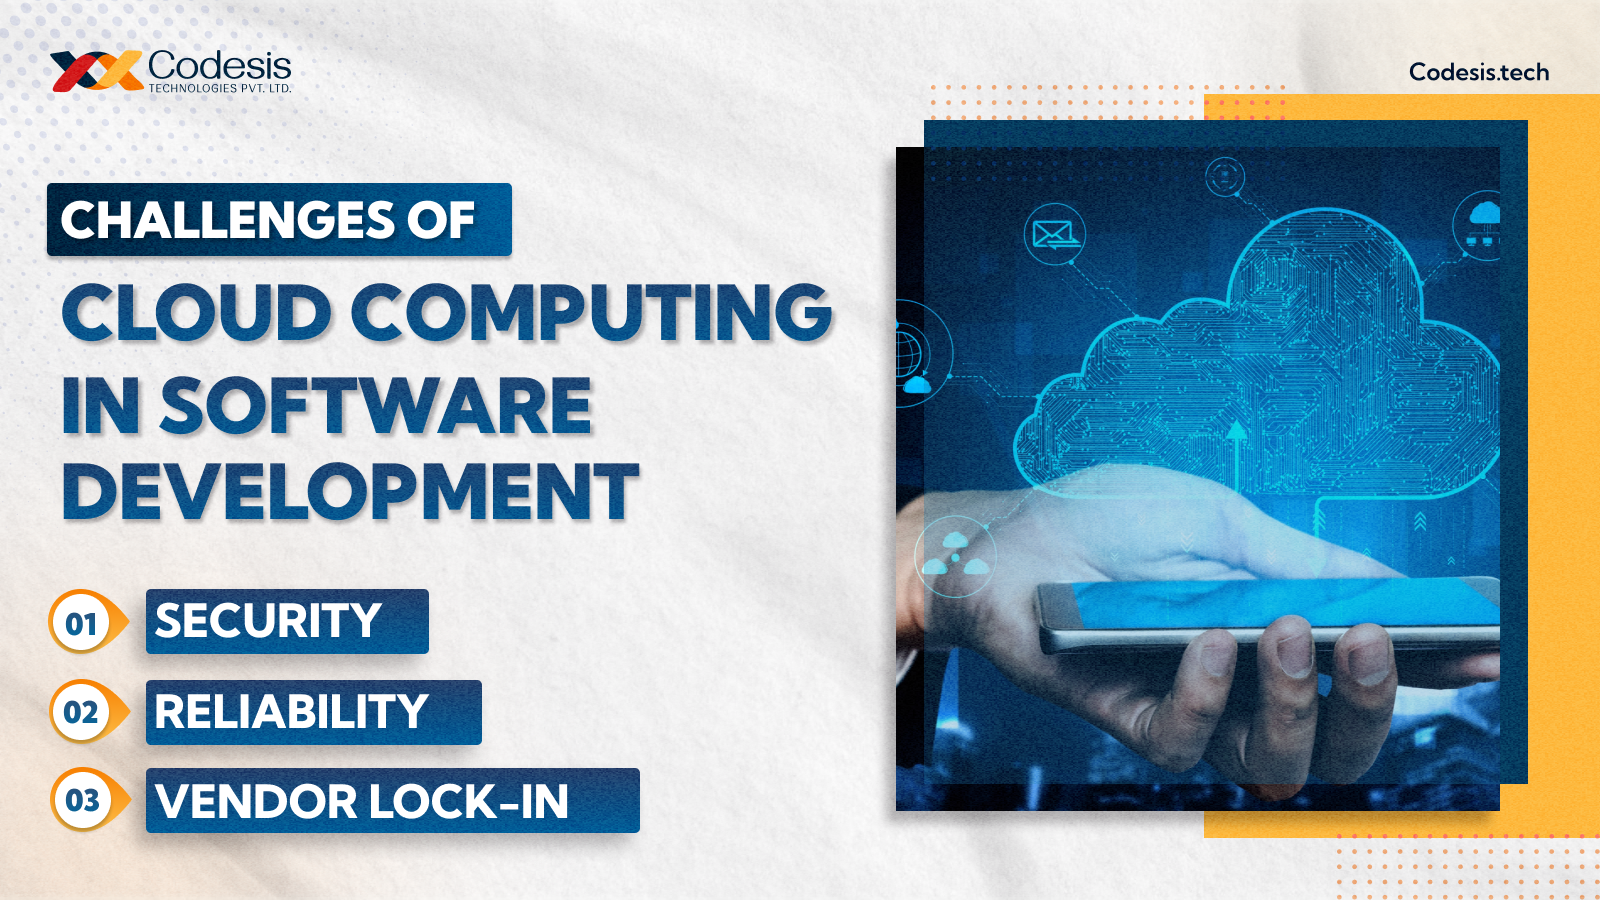 an image showing challenges of Cloud computing in software development with the image of a person holding a phone and cloud emerging from it